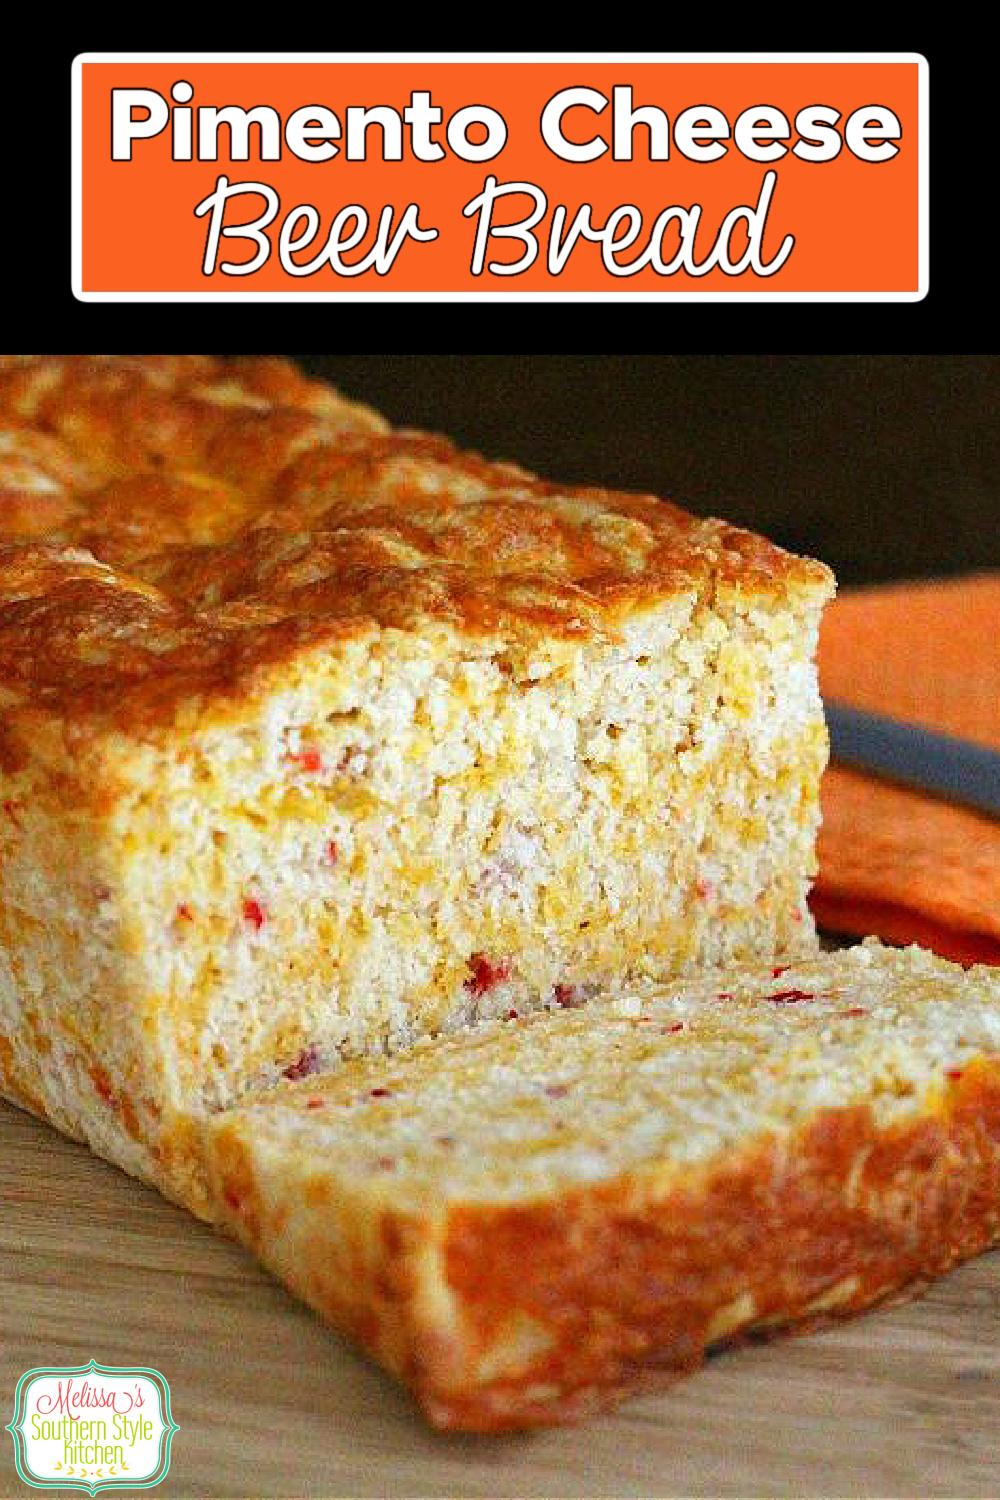 Two favorites collide in this Pimento Cheese Beer Bread #pimentocheese #beerbread #beerbreadrecipes #breadrecipes #soujthernfood #southernrecipes #southernpimentocheese via @melissasssk